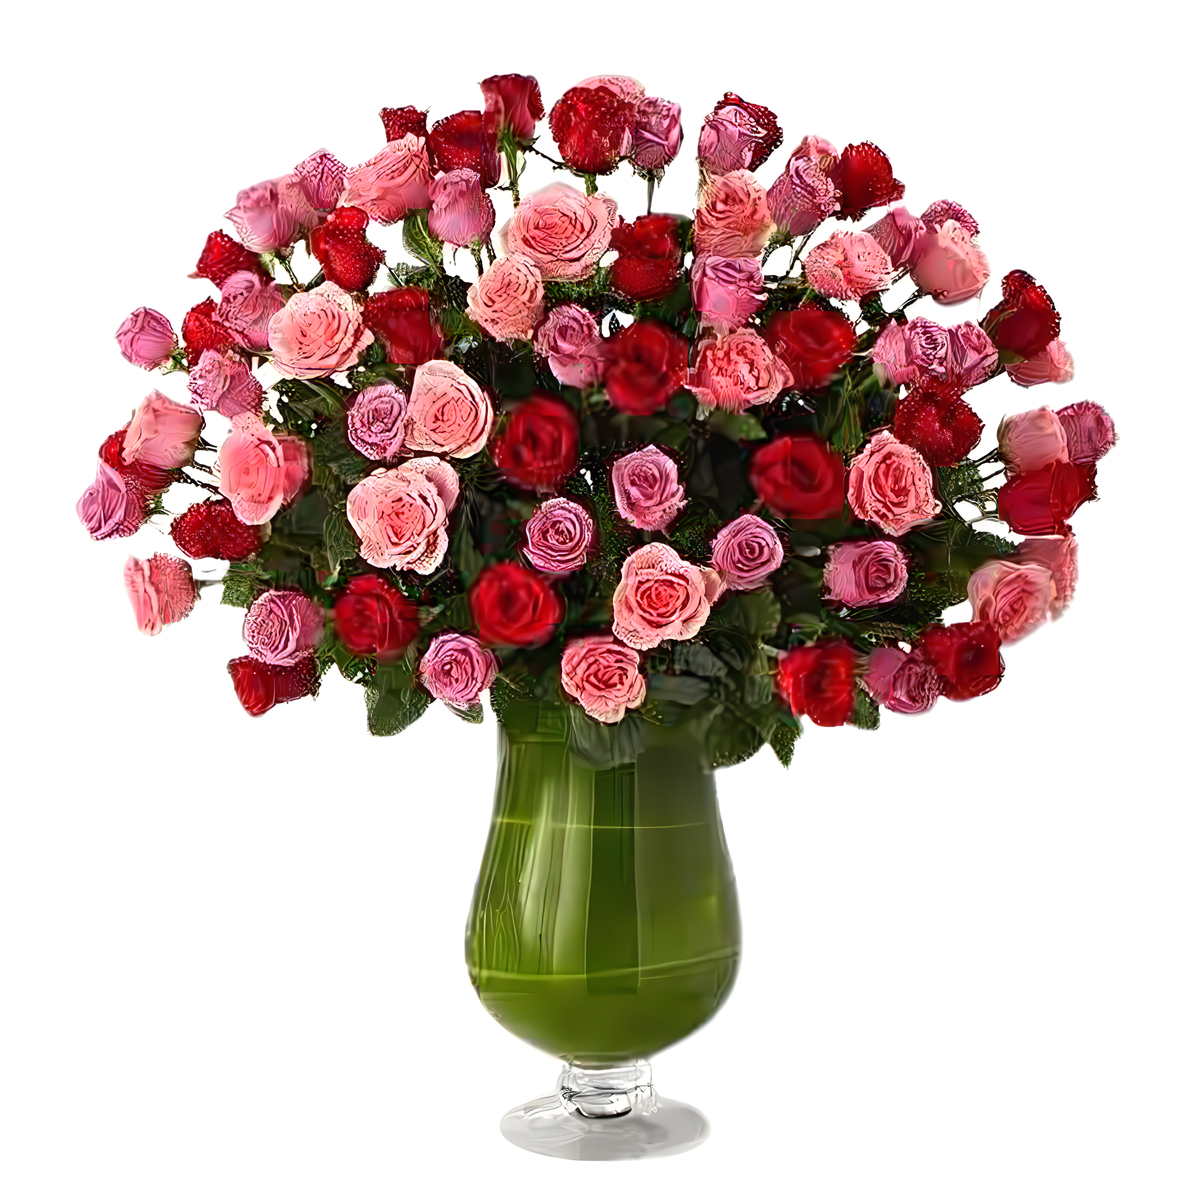 Manhattan Flower Delivery - Luxury Rose Bouquet - 24 Premium Red, Pink &amp; Lavender Long-Stem Roses - Products &gt; Luxury Collection